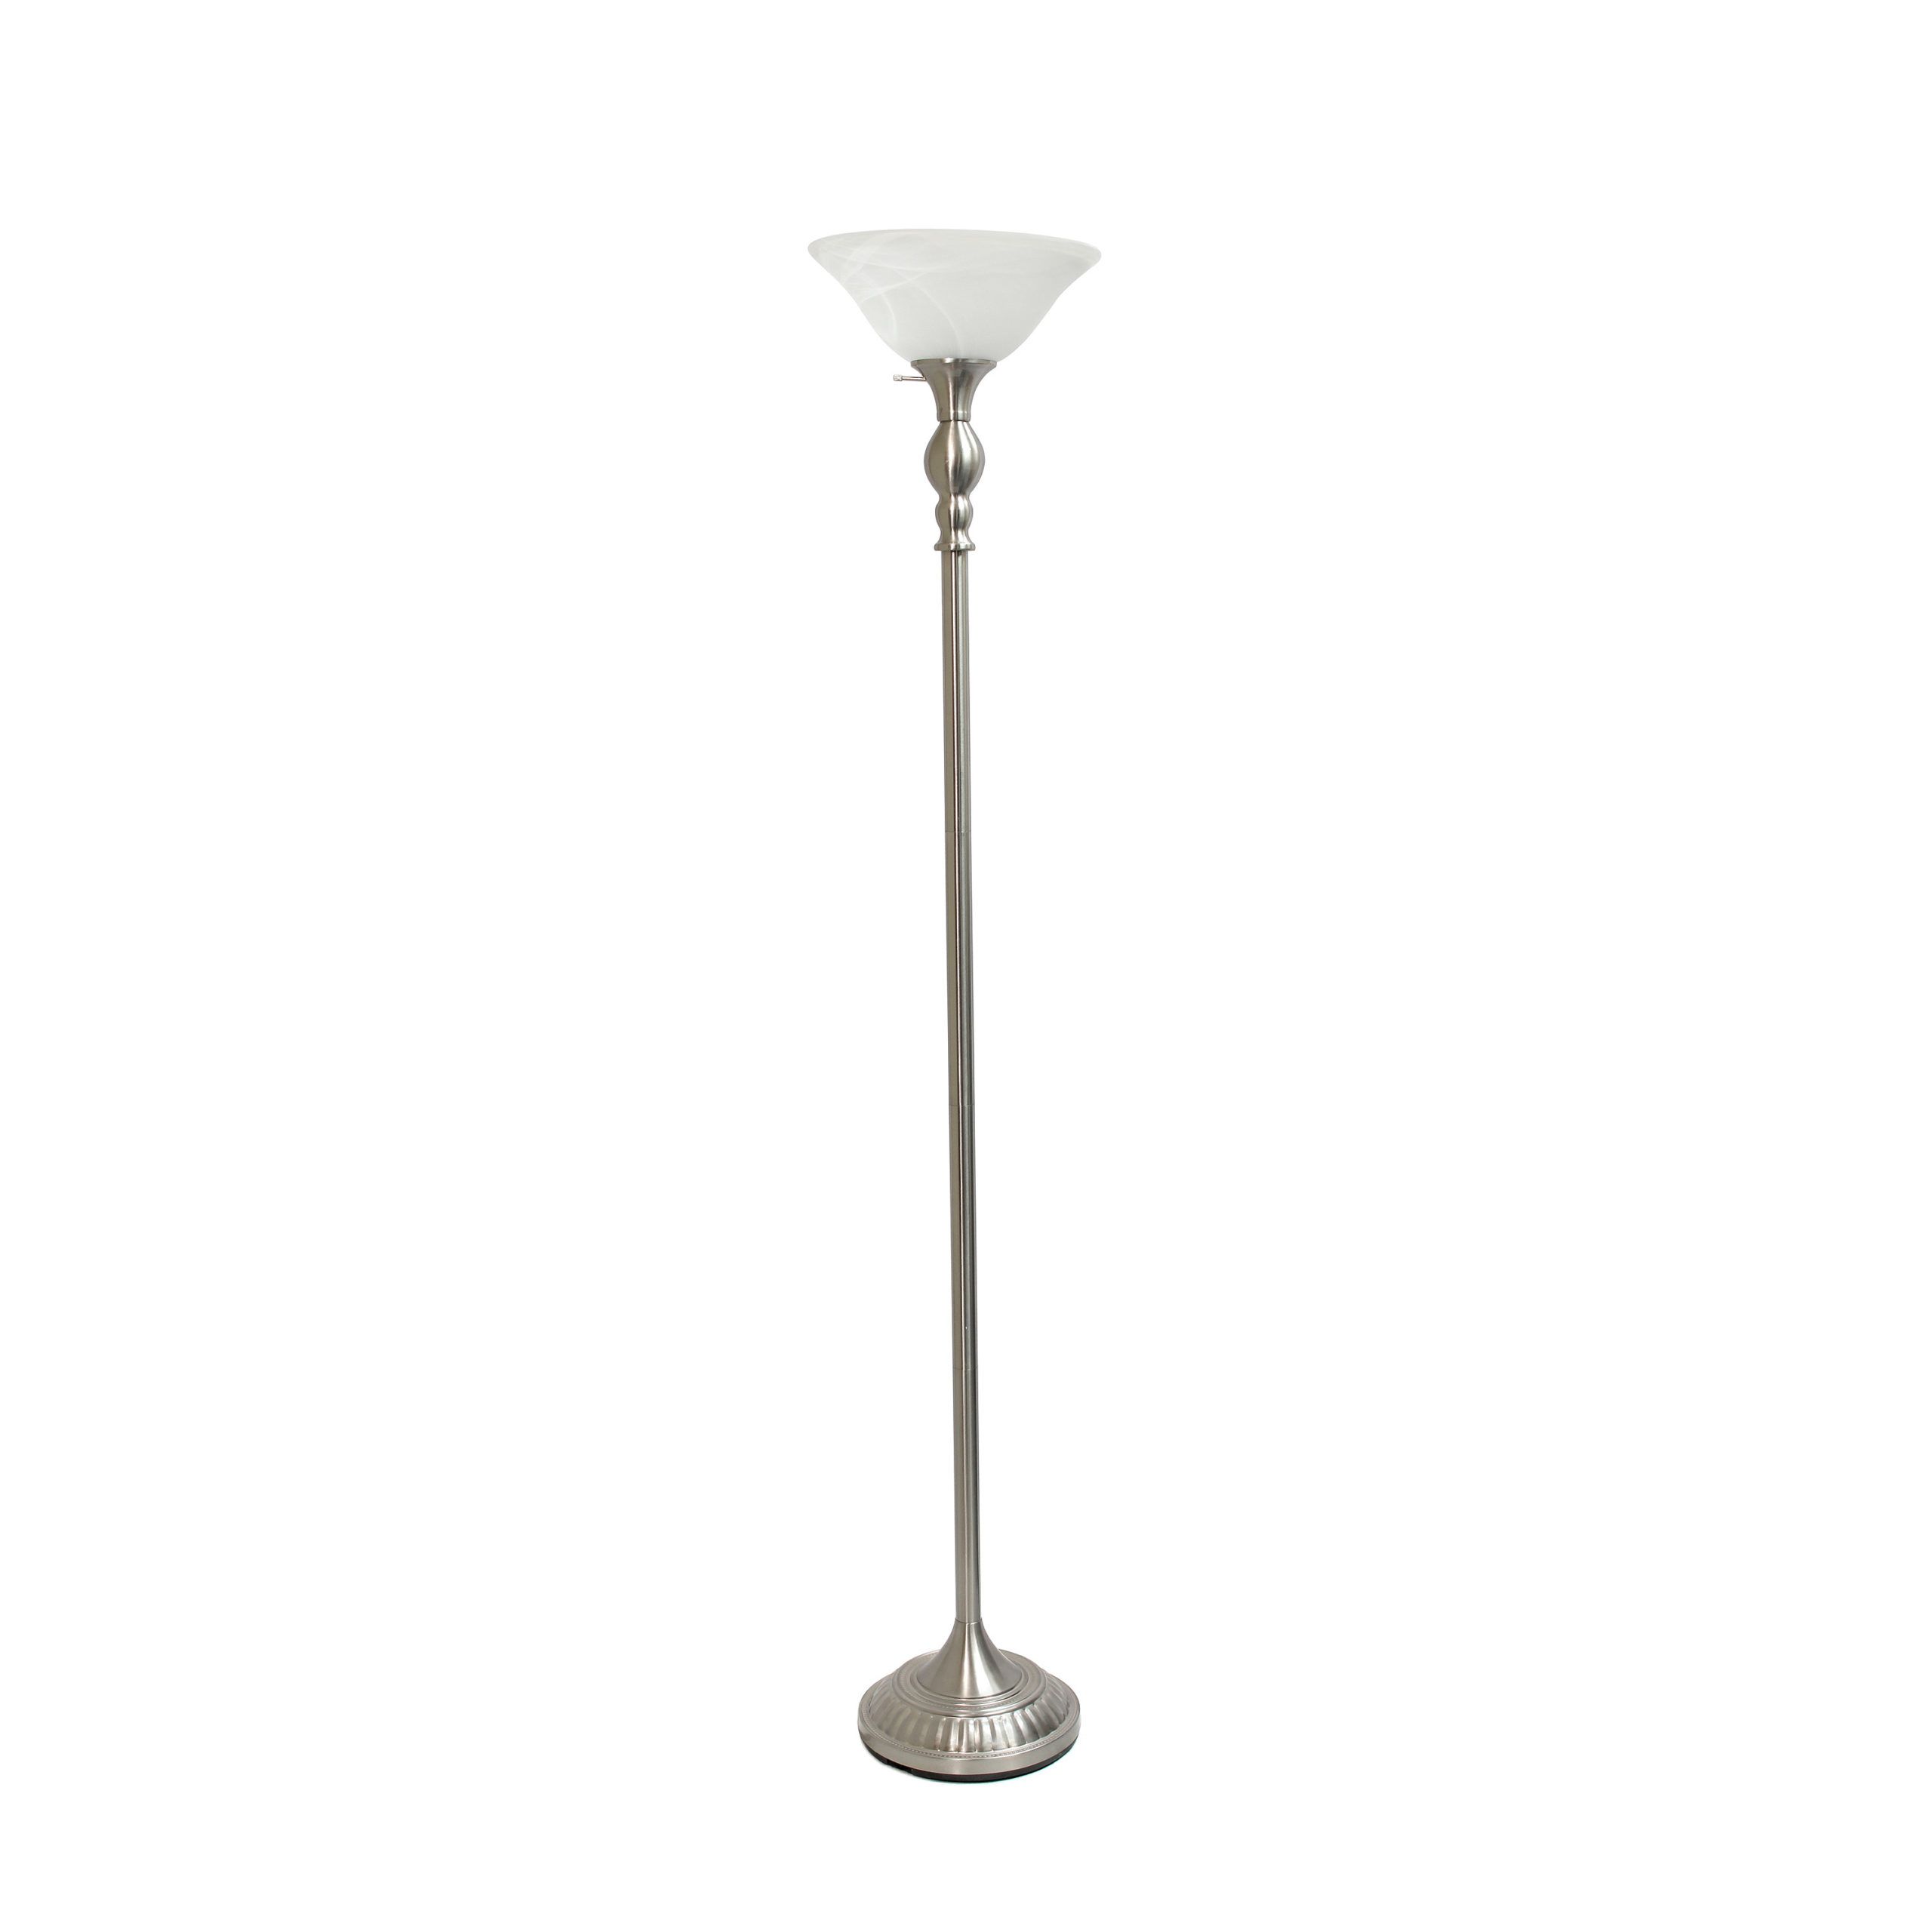 Elegant Designs 1 Light Torchiere Floor Lamp With Marbleized White Glass  Shade, Brushed Nickel | All The Rages With Regard To Glass Satin Nickel Floor Lamps (View 7 of 15)